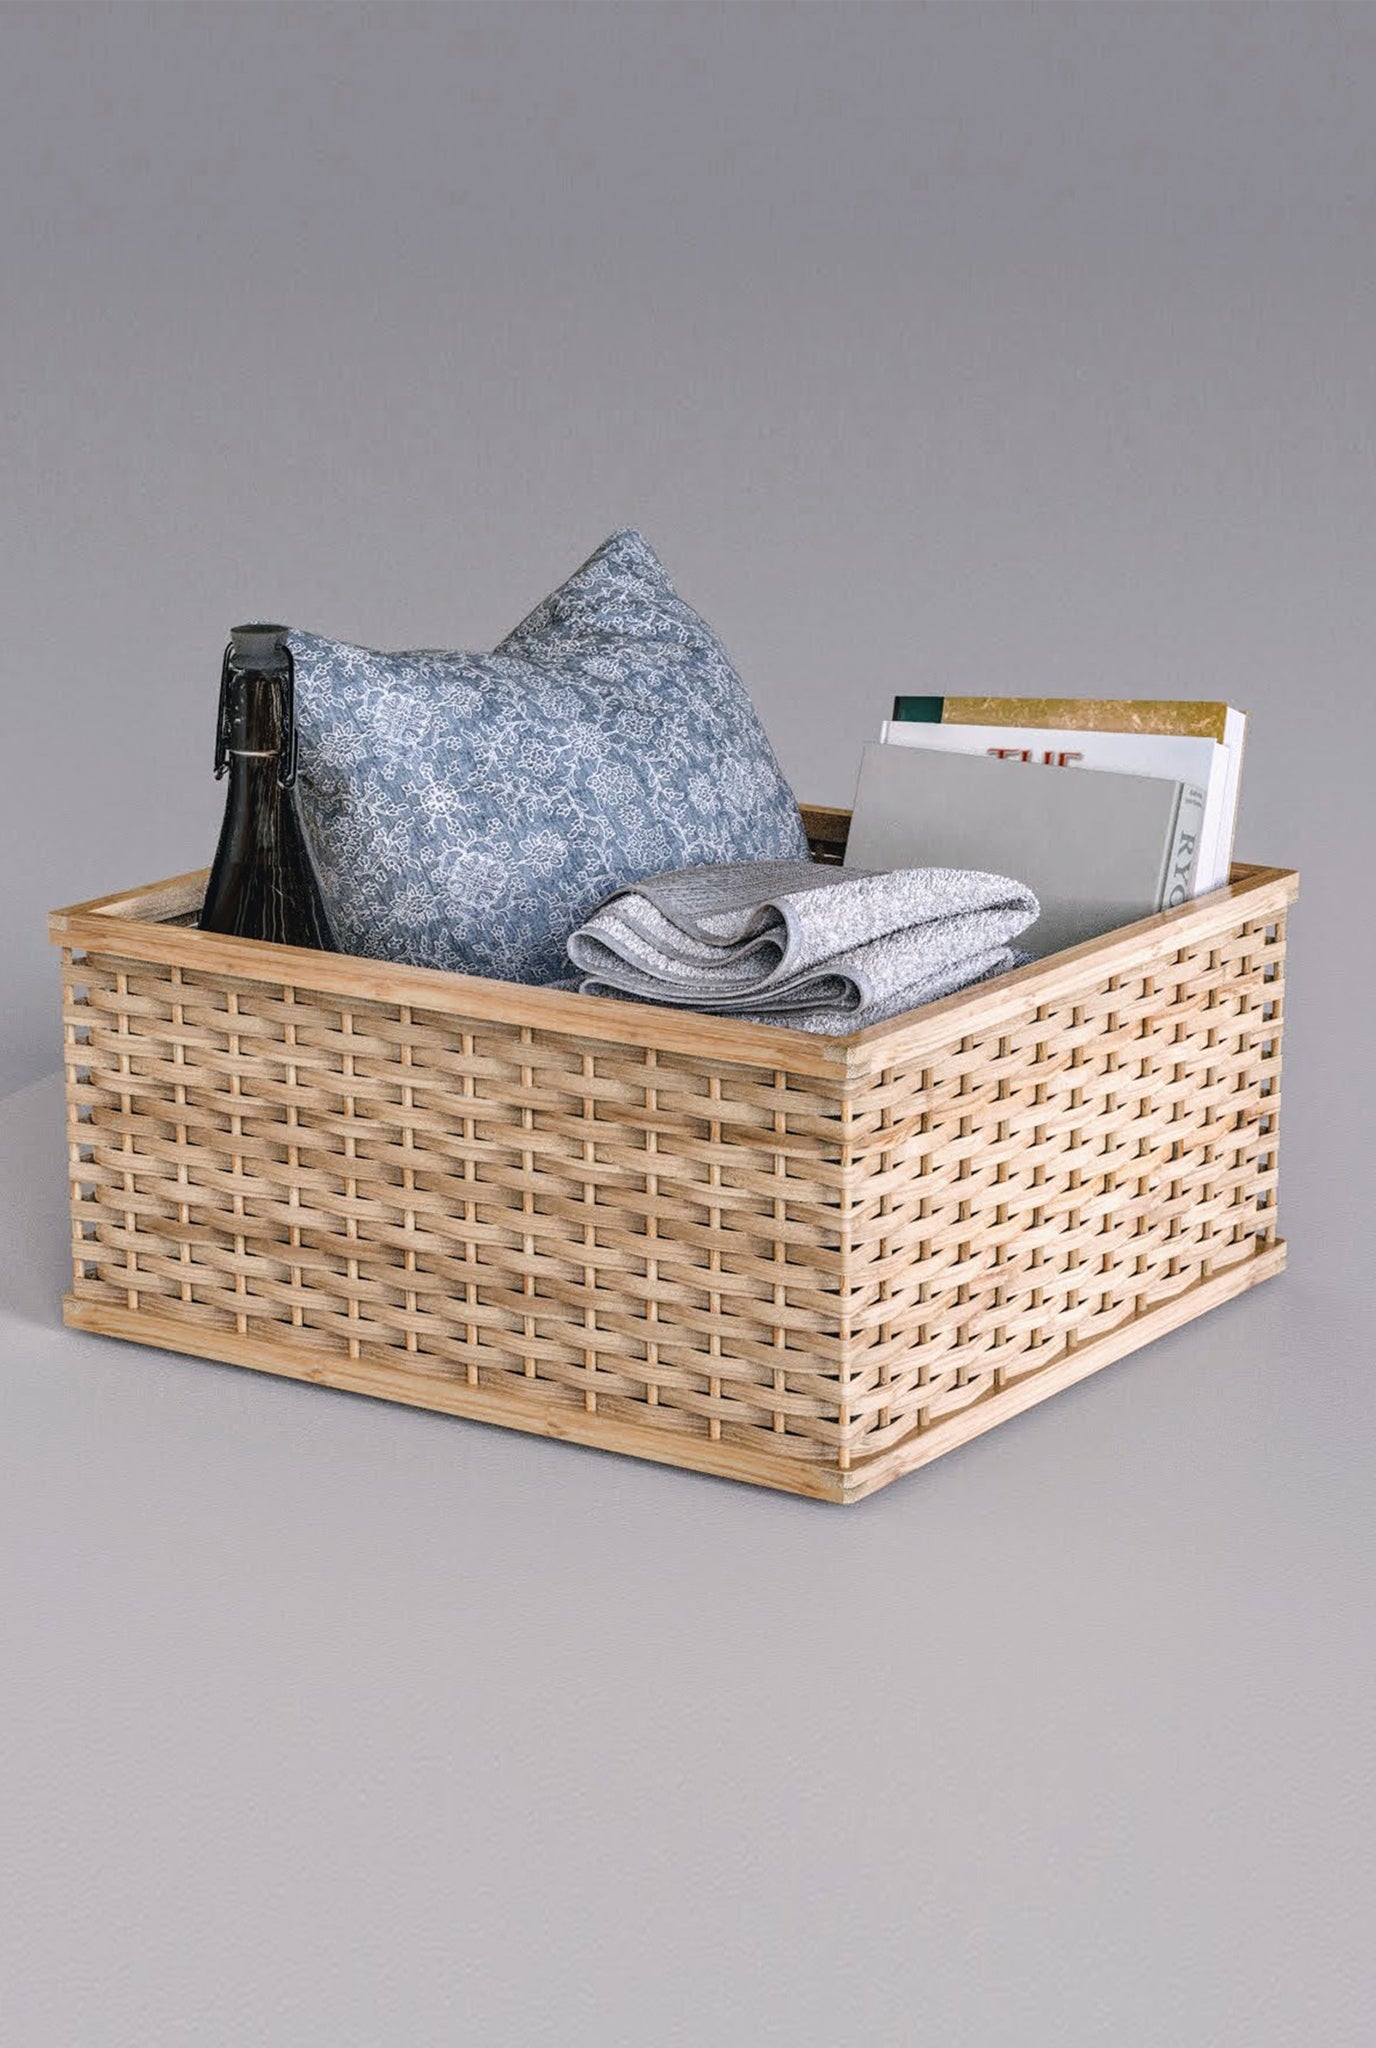 handcrafted-stackable-jodi-basket-organizer-bamboo-woven-sustainable-colour options